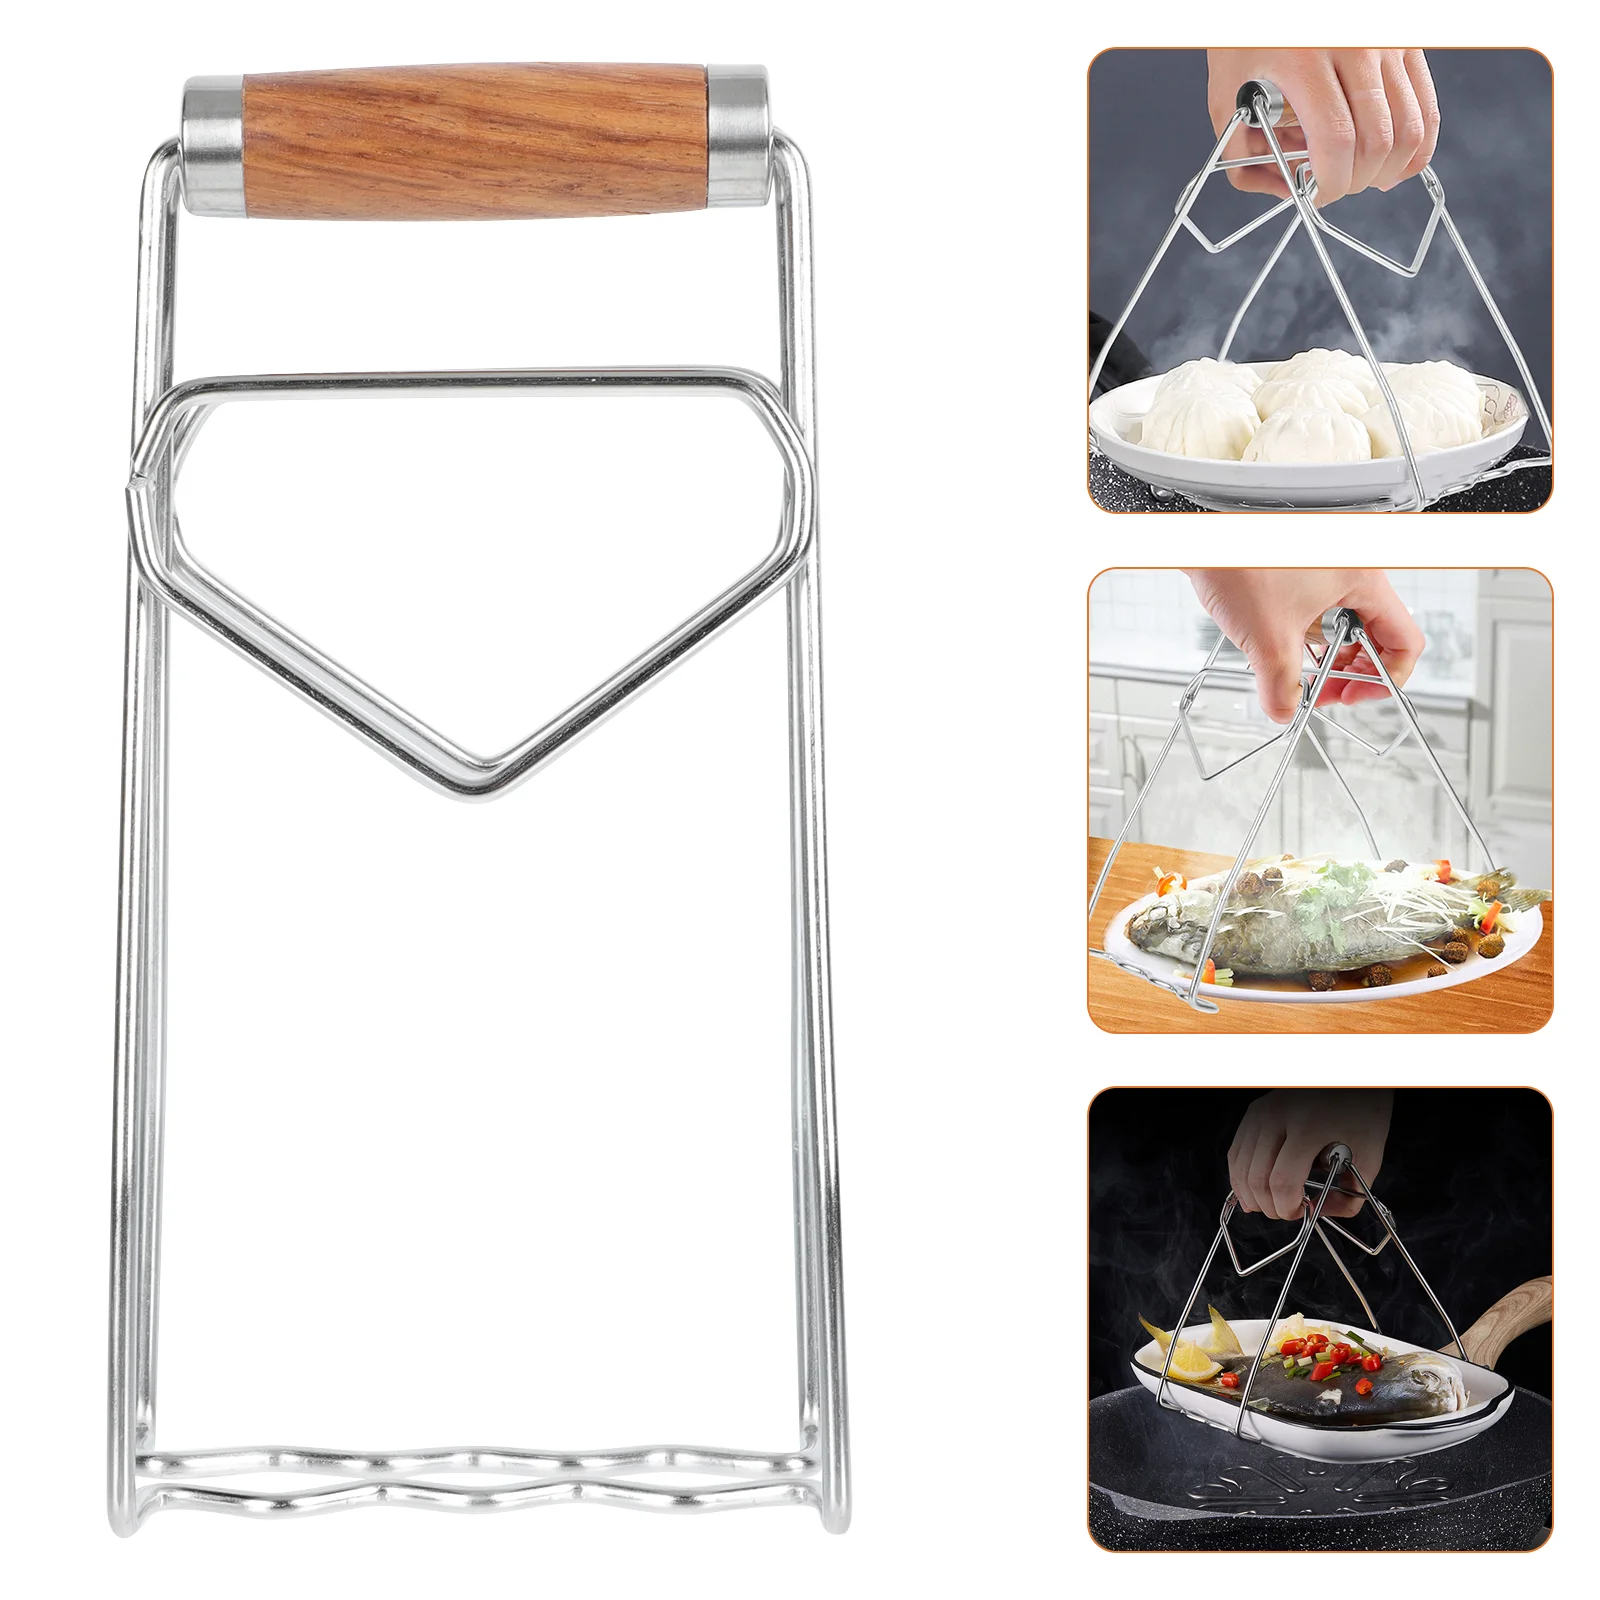 

Clip Plate Dish Hot Gripper Clamp Bowl Retriever Holder Bowls Folding Kitchen Steel Stainless Pan Tongs Tong Lifter Anti Scald